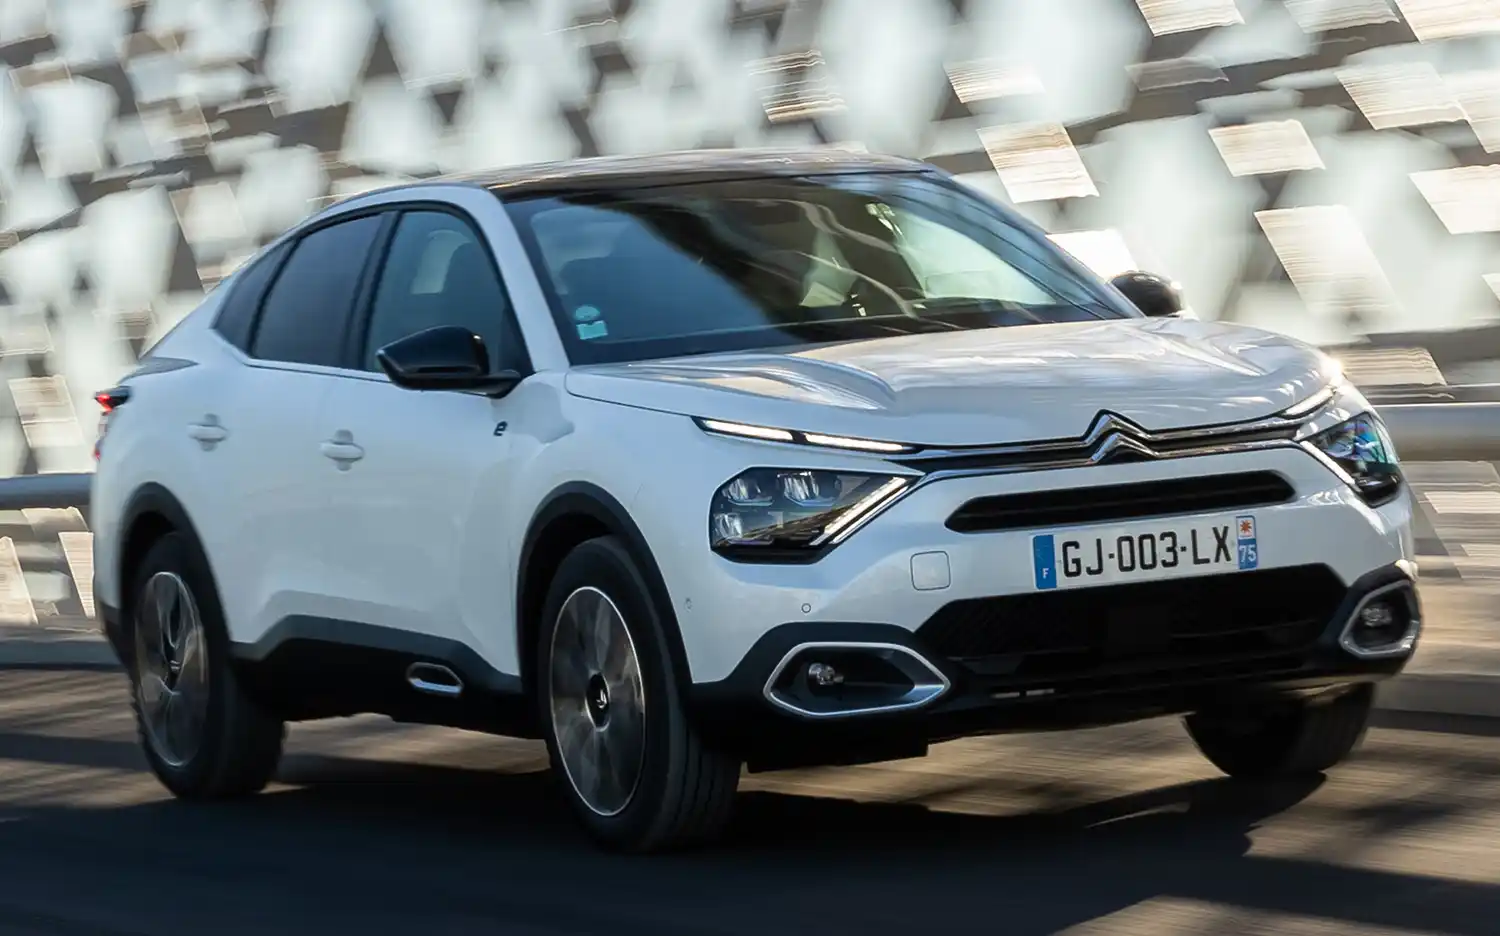 CITROËN ë-C4 and ë-C4 X DELIVER MORE POWER WITH NEW EFFICIENT ELECTRIC  ENGINE AND MORE RANGE UP TO 420 KM, Citroën